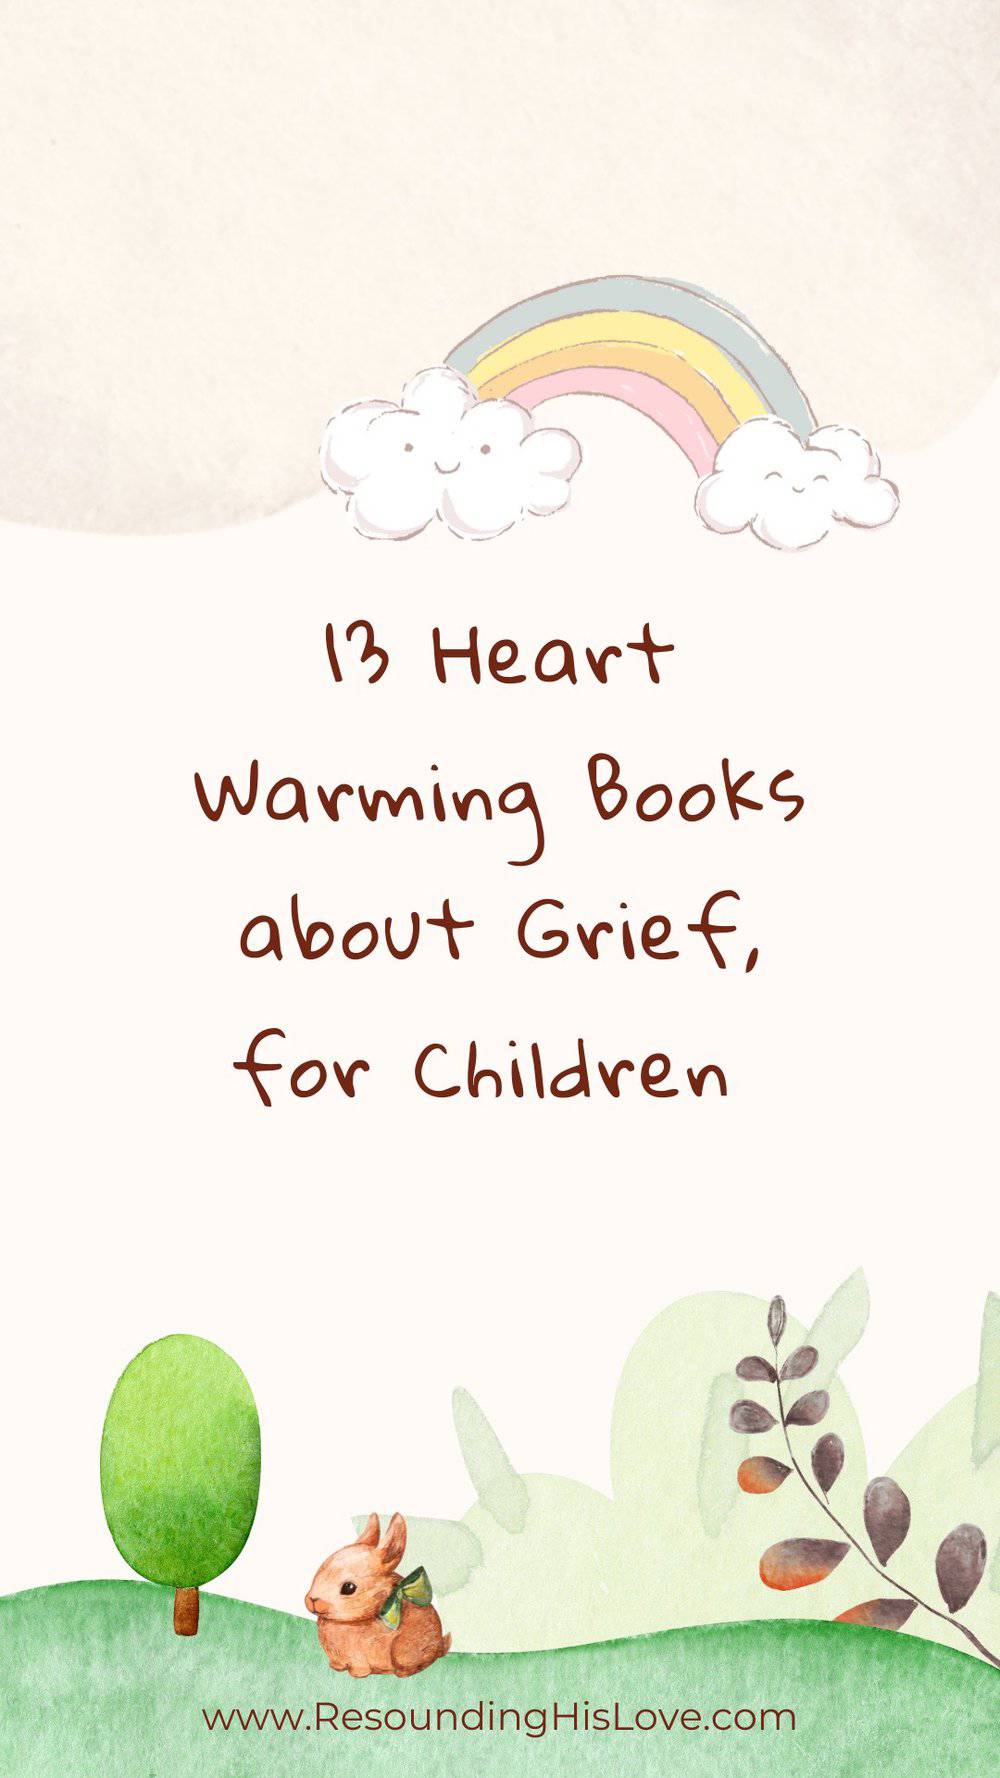 childlike image of a rainbow and clouds in the sky with a small bunny near a tree with text 13 Heart Warming Books About Grief for Children